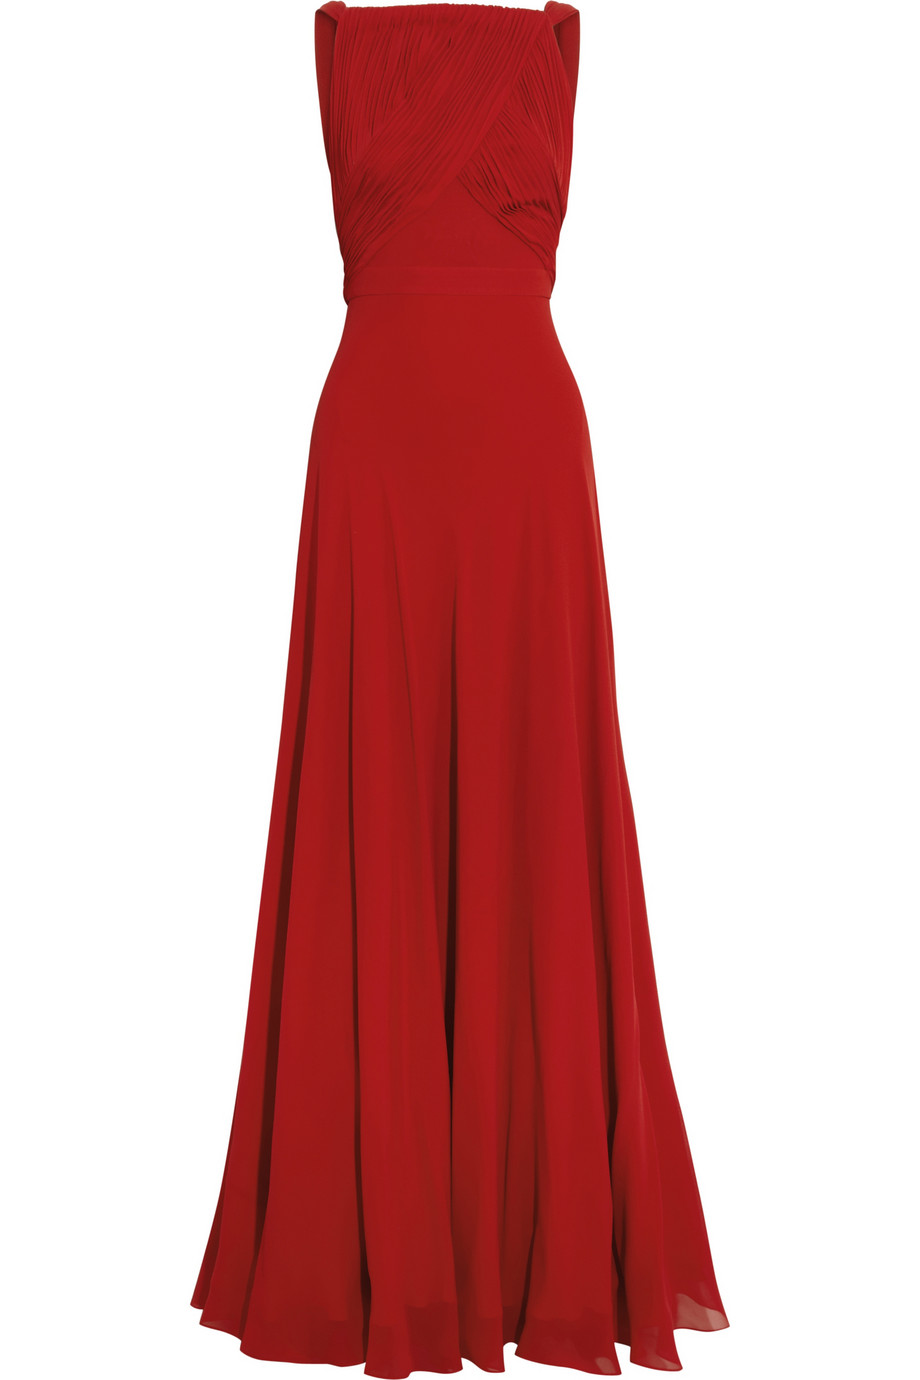 Lyst - Saint laurent Hand-pleated Silk-georgette Gown in Red